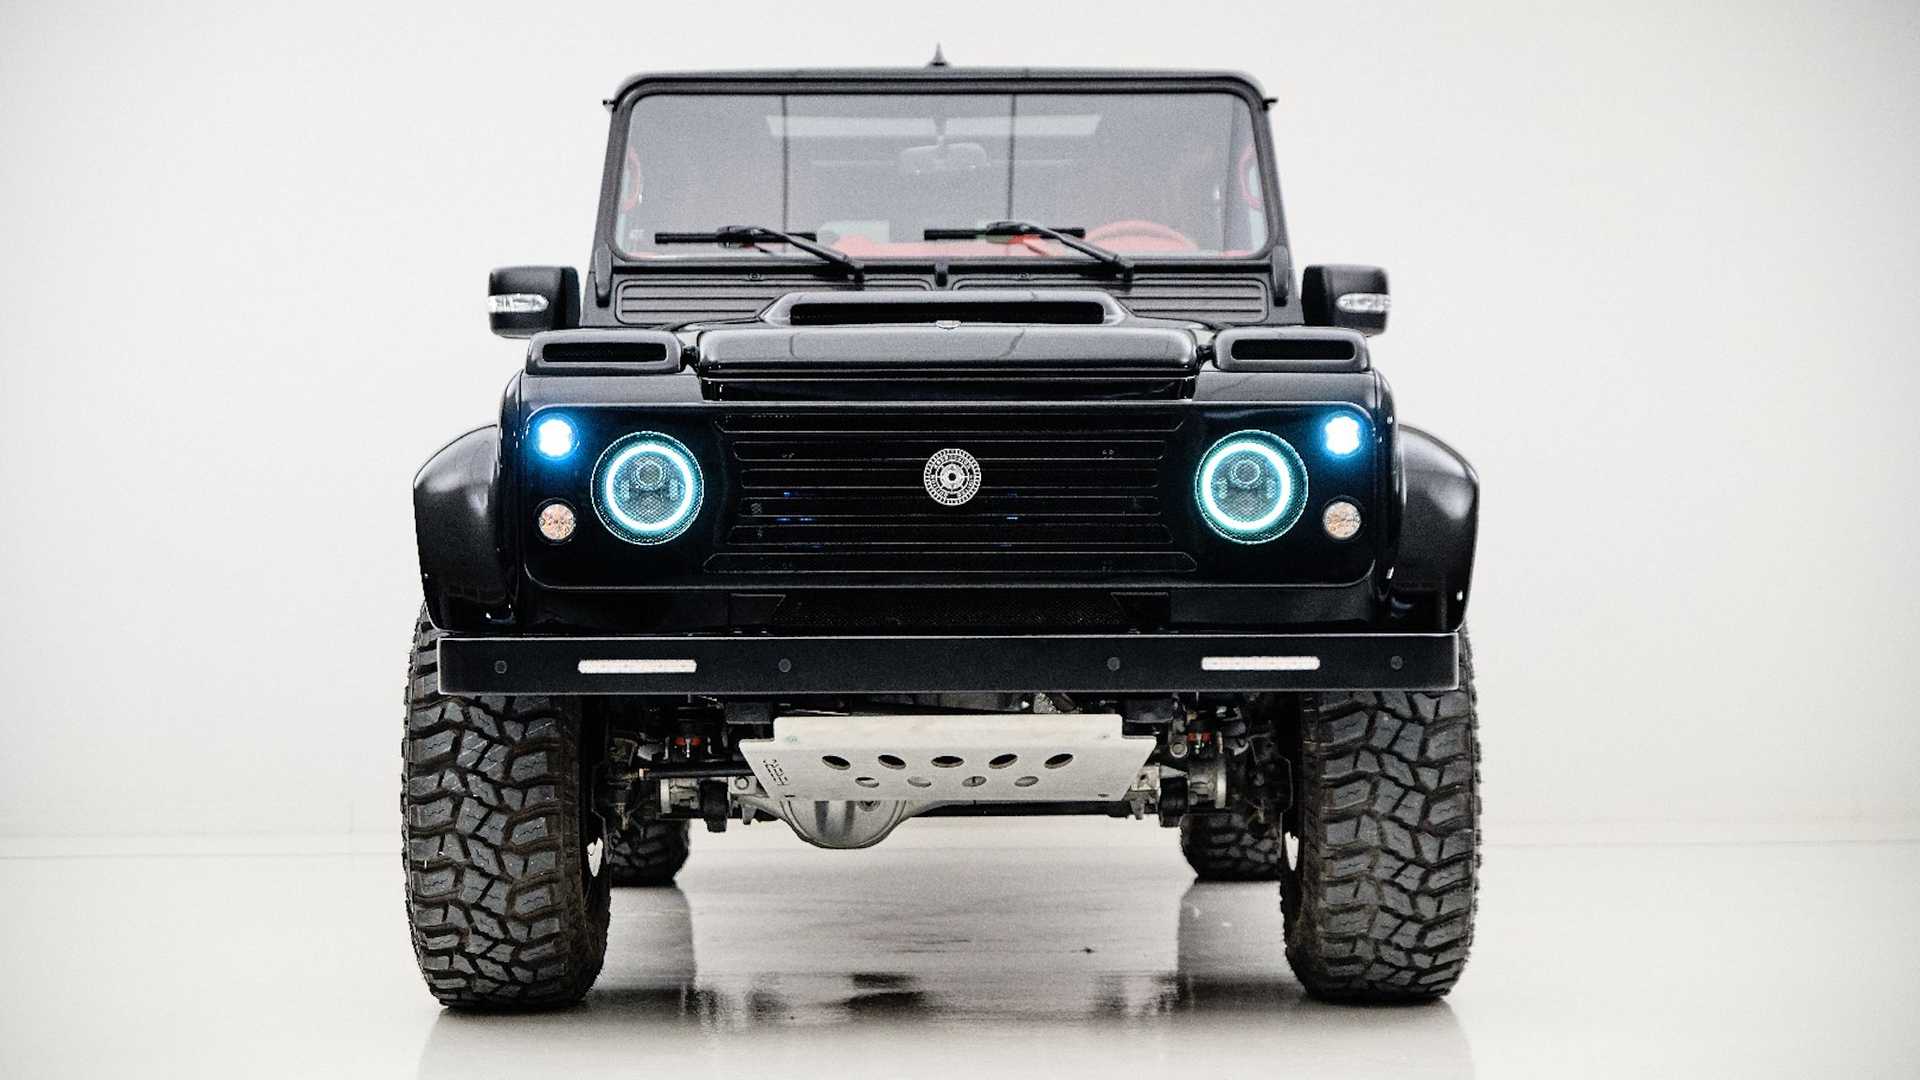 Land Rover Defender Restomod Has A Supercharged V8 And Porsche Paint